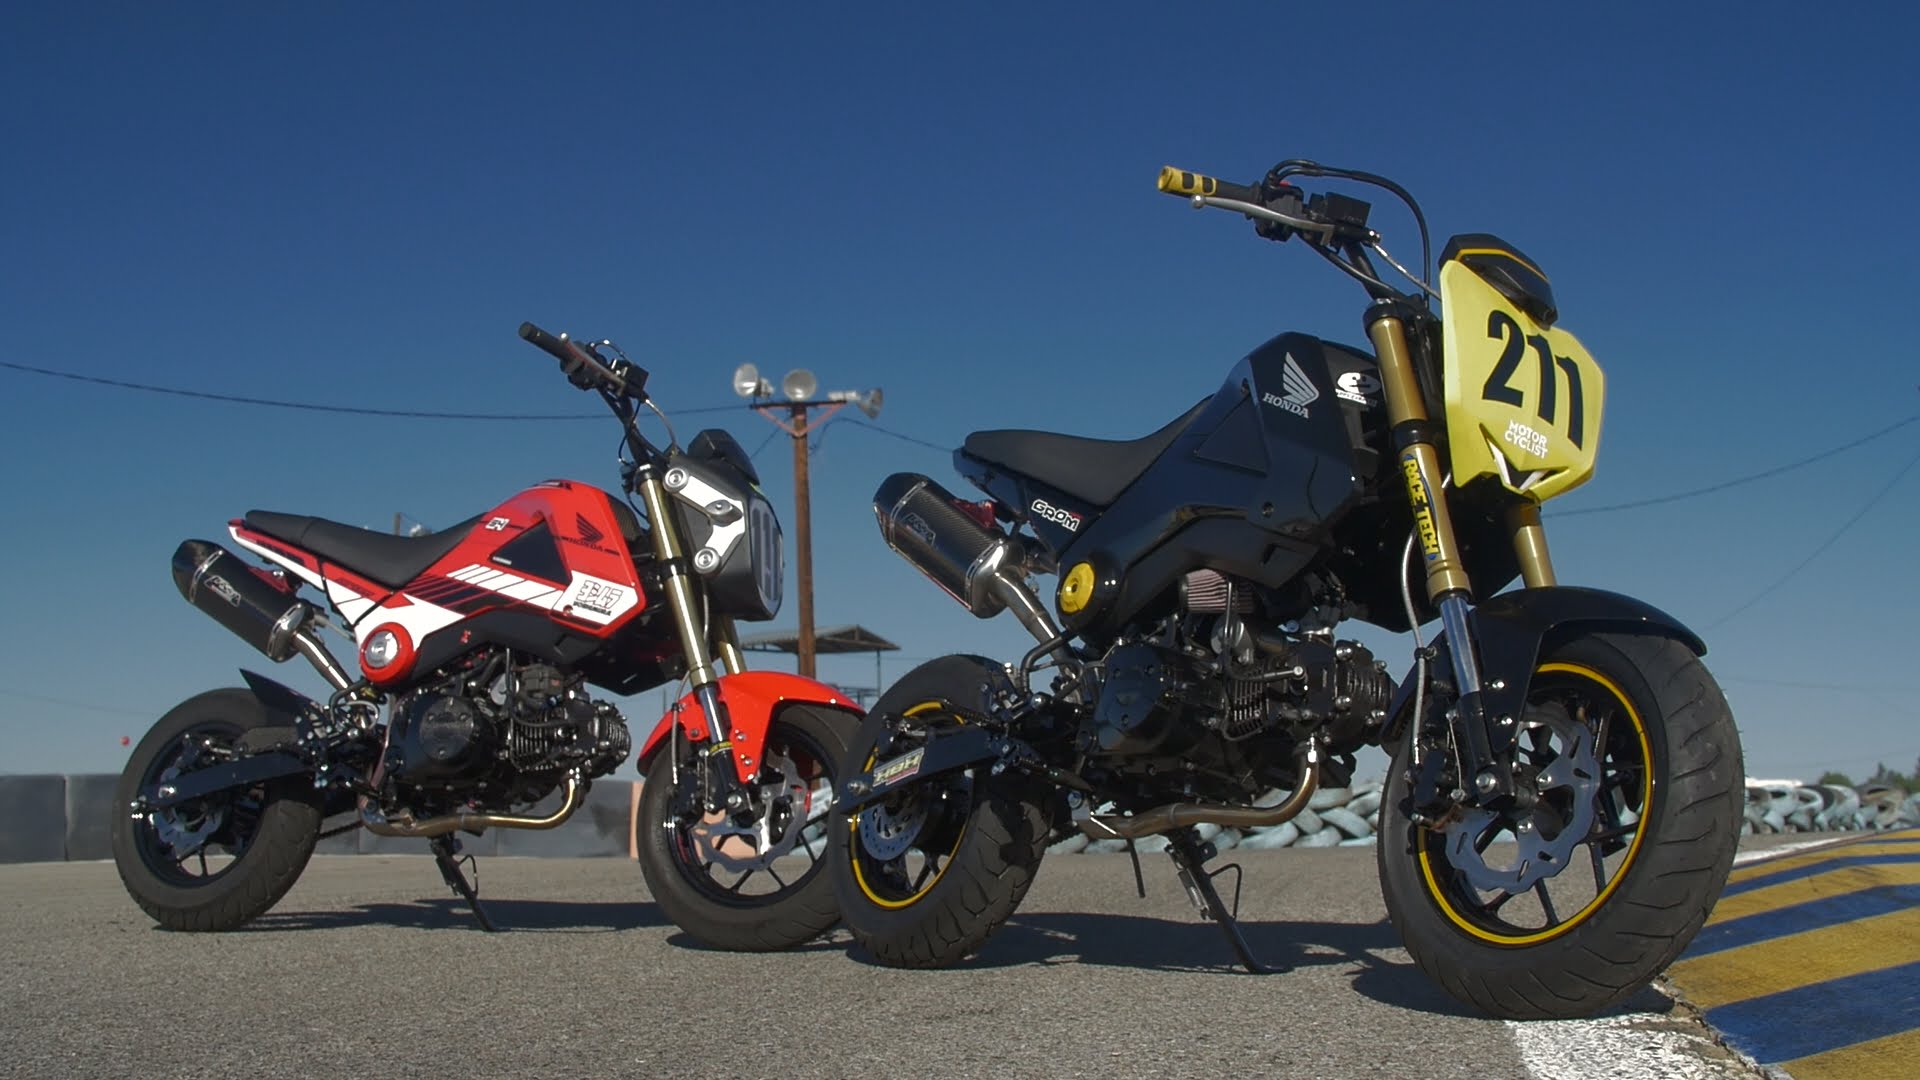 Honda Grom Roadracing With the UMRA. ON TWO WHEELS